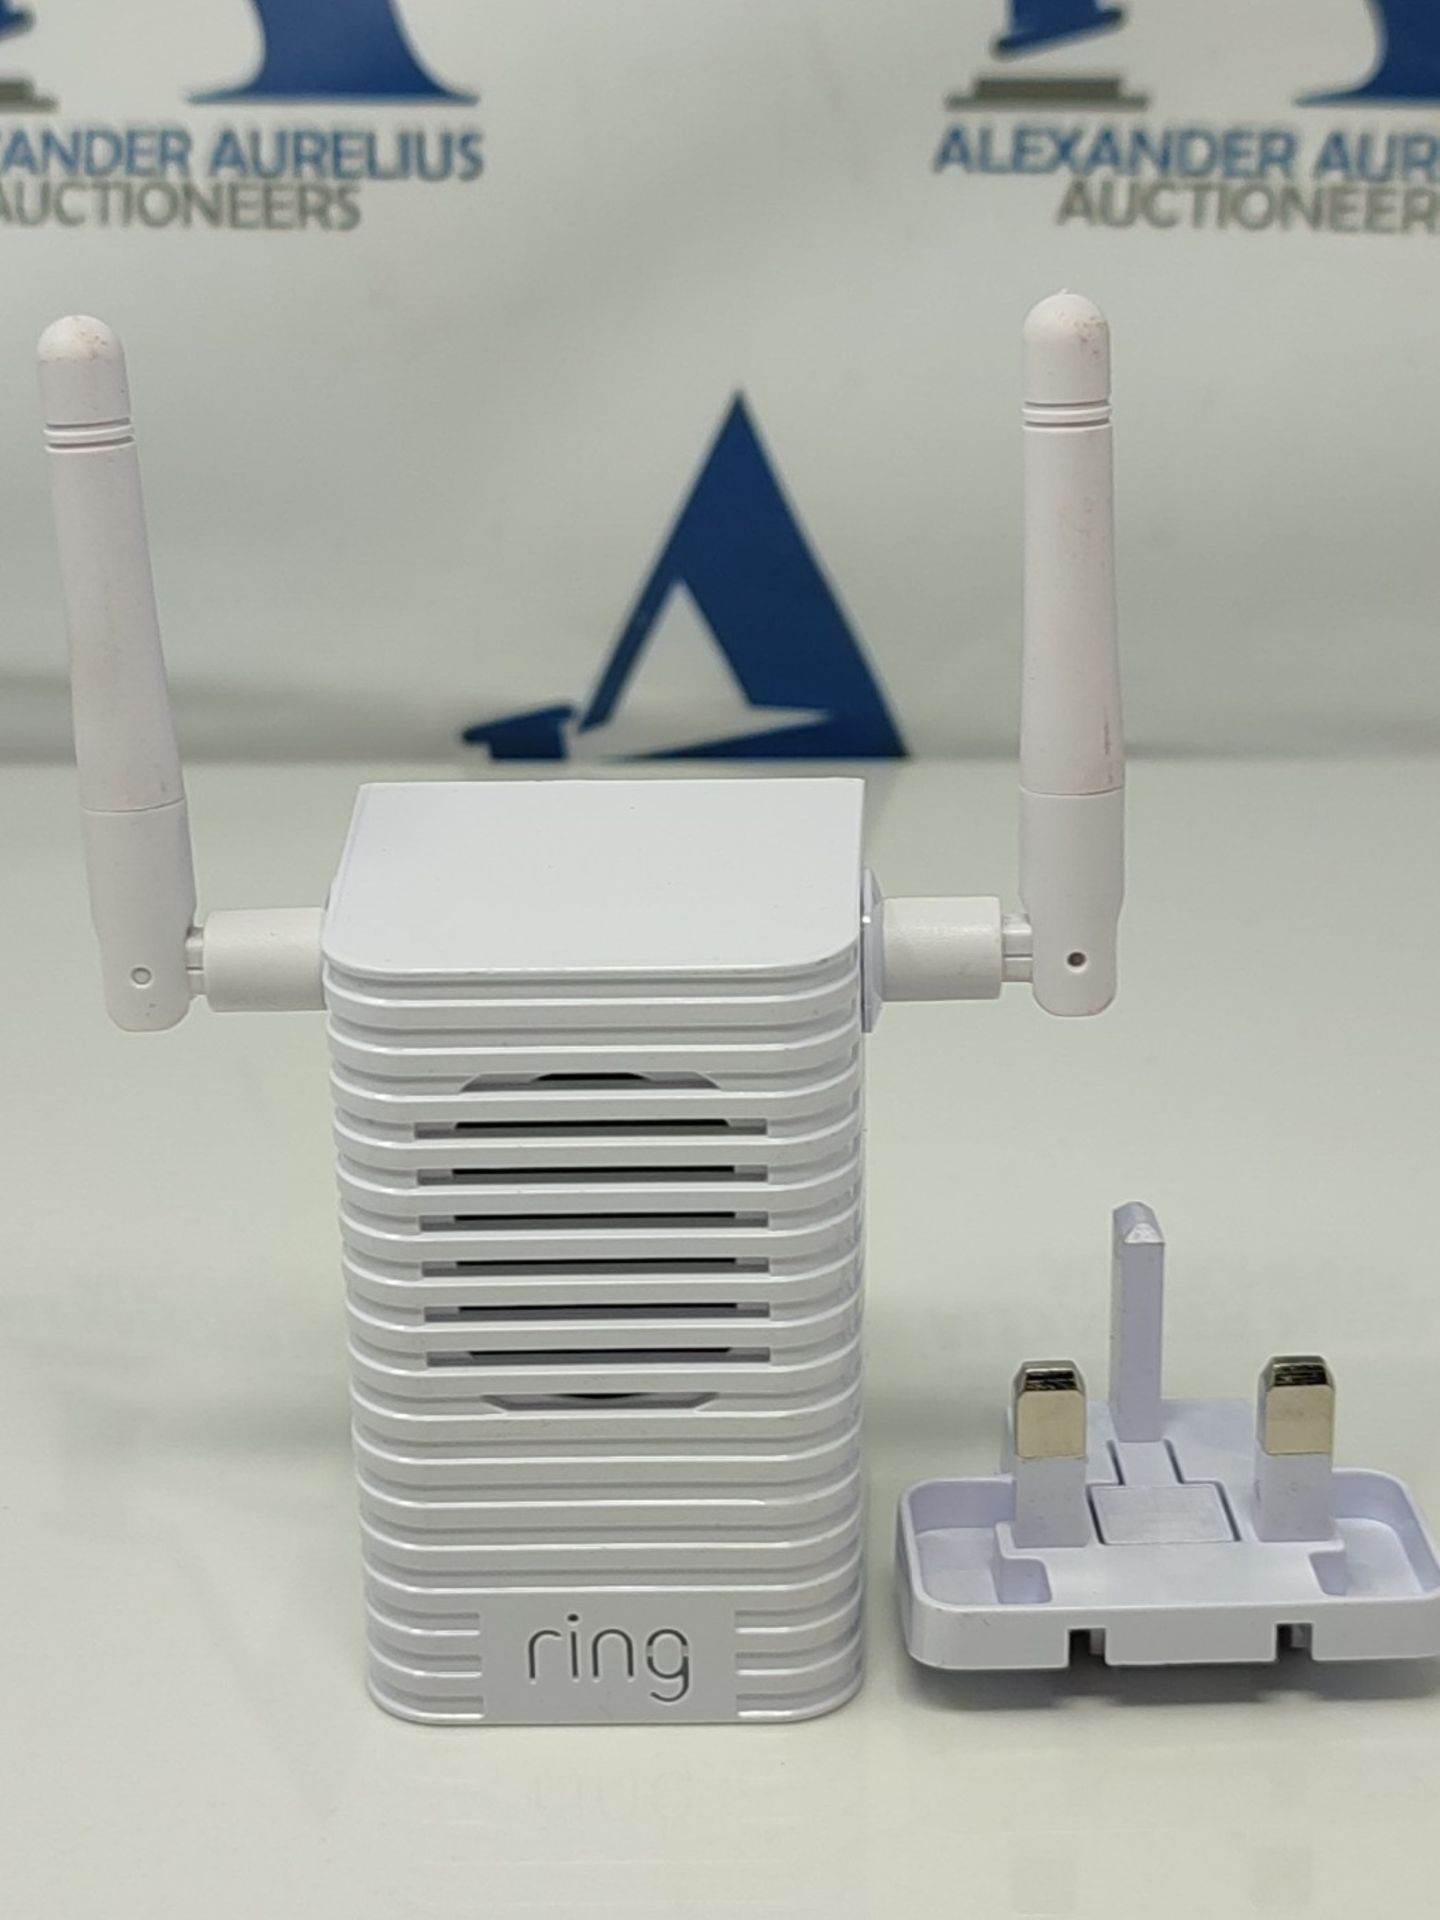 Ring Chime Pro, 8AC4P6-0EU0 , Wifi extender, Connects with all Ring devices, white - Image 2 of 3